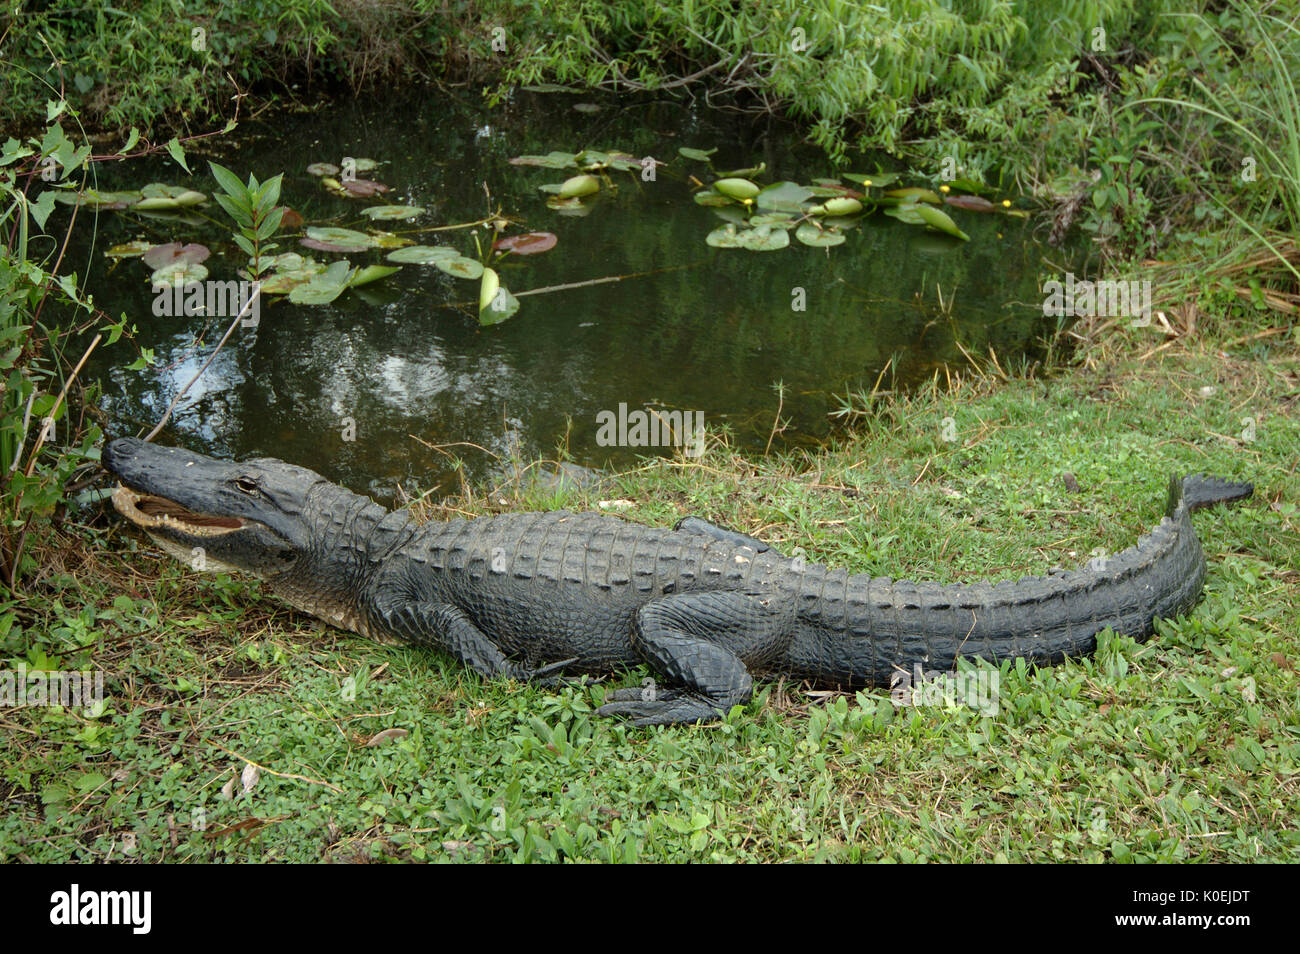 American Alligator, Alligator mississippiensis,adult resting on bank by water, Everglades National Park, predator Stock Photo